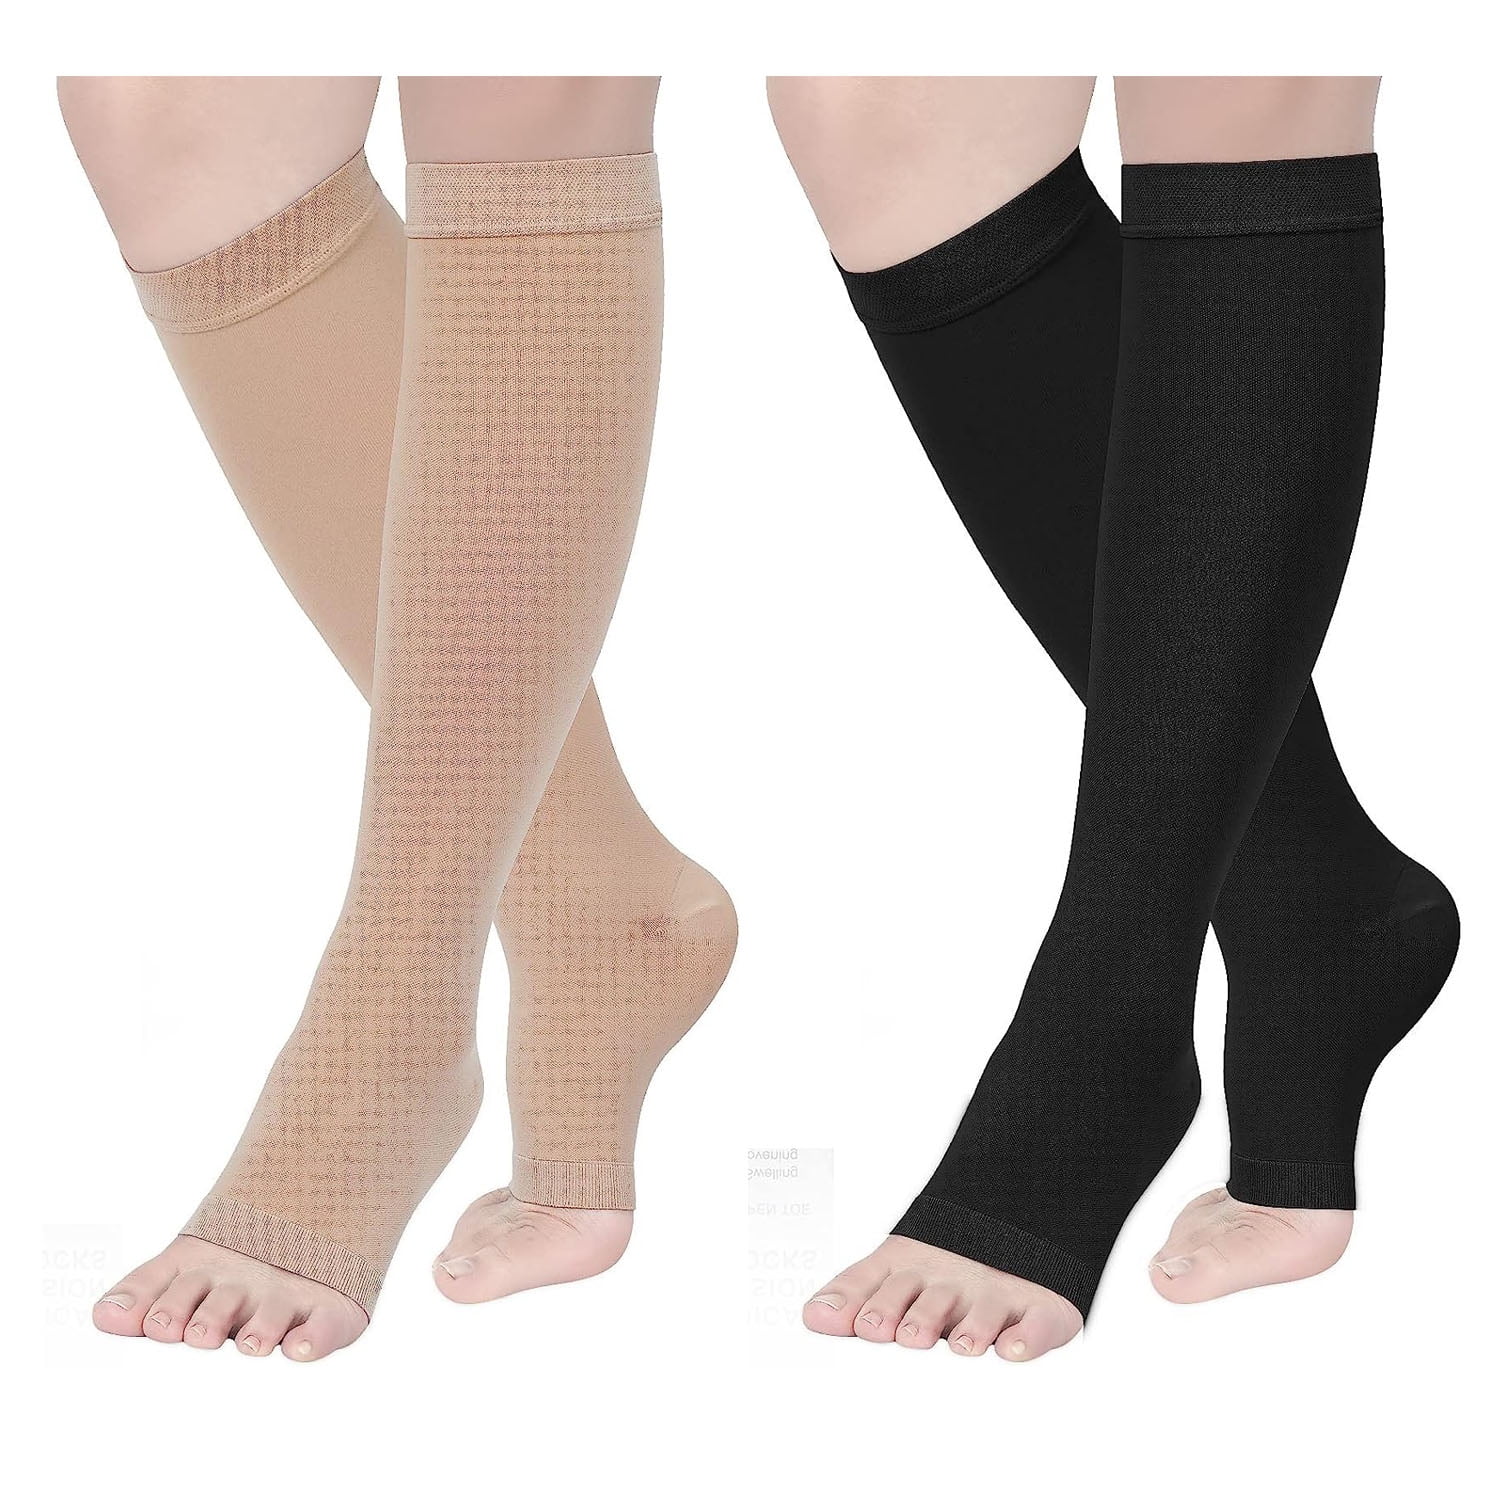 1 Pair Wukang Knee High Graduated Compression Stockings 20-30 mmhg Open Toe Compression  Socks for Women and Men 